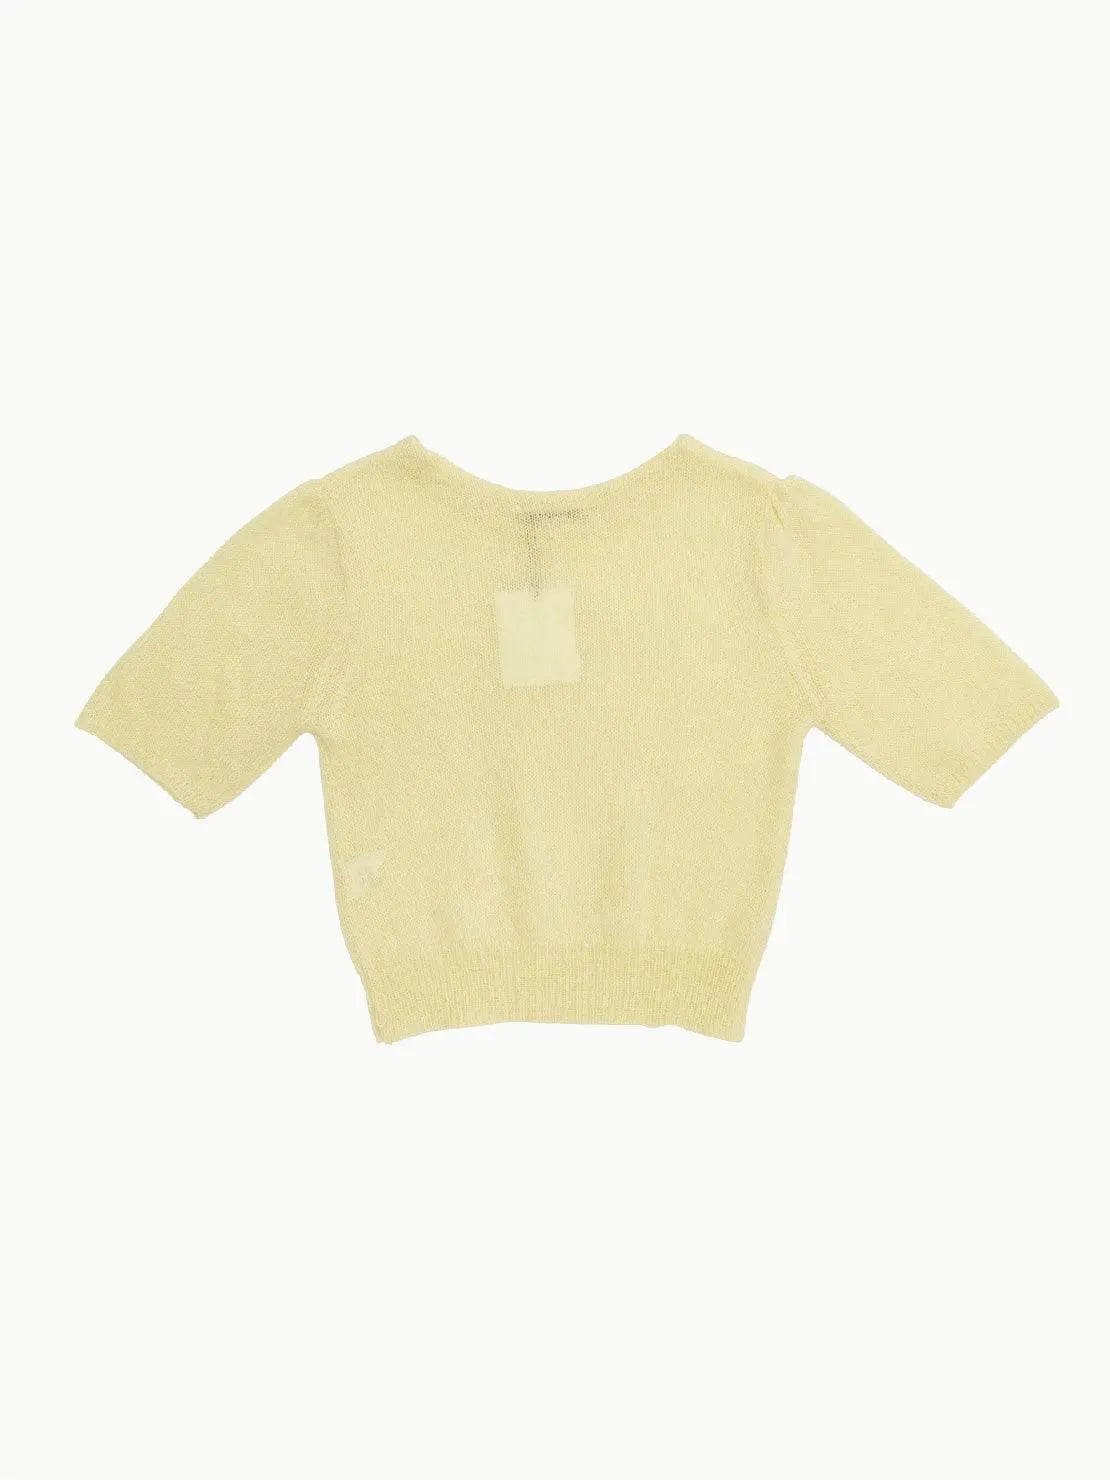 A light yellow, short-sleeved, knitted Yellow Balloon Sleeve Pullover from Amomento is pictured against a plain white background. The sweater features a simple, round neckline and appears to be lightweight with a soft texture. Perfect for those sunny Barcelona days.